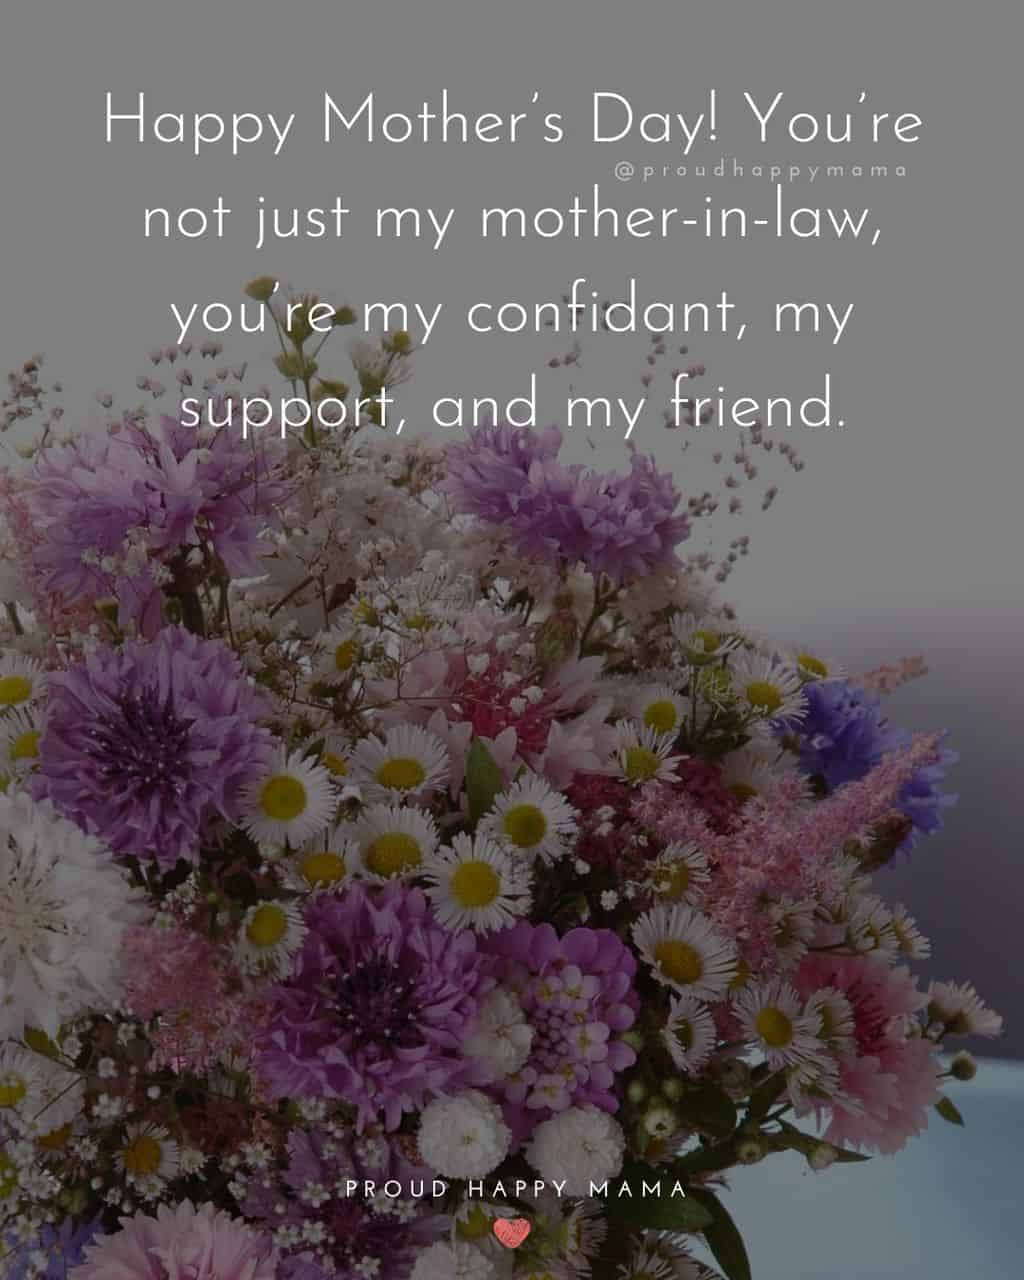 Happy Mothers Day Quotes For Mother In Law - Happy Mother’s Day! You’re not just my mother-in-law, you’re my confidant, my support,